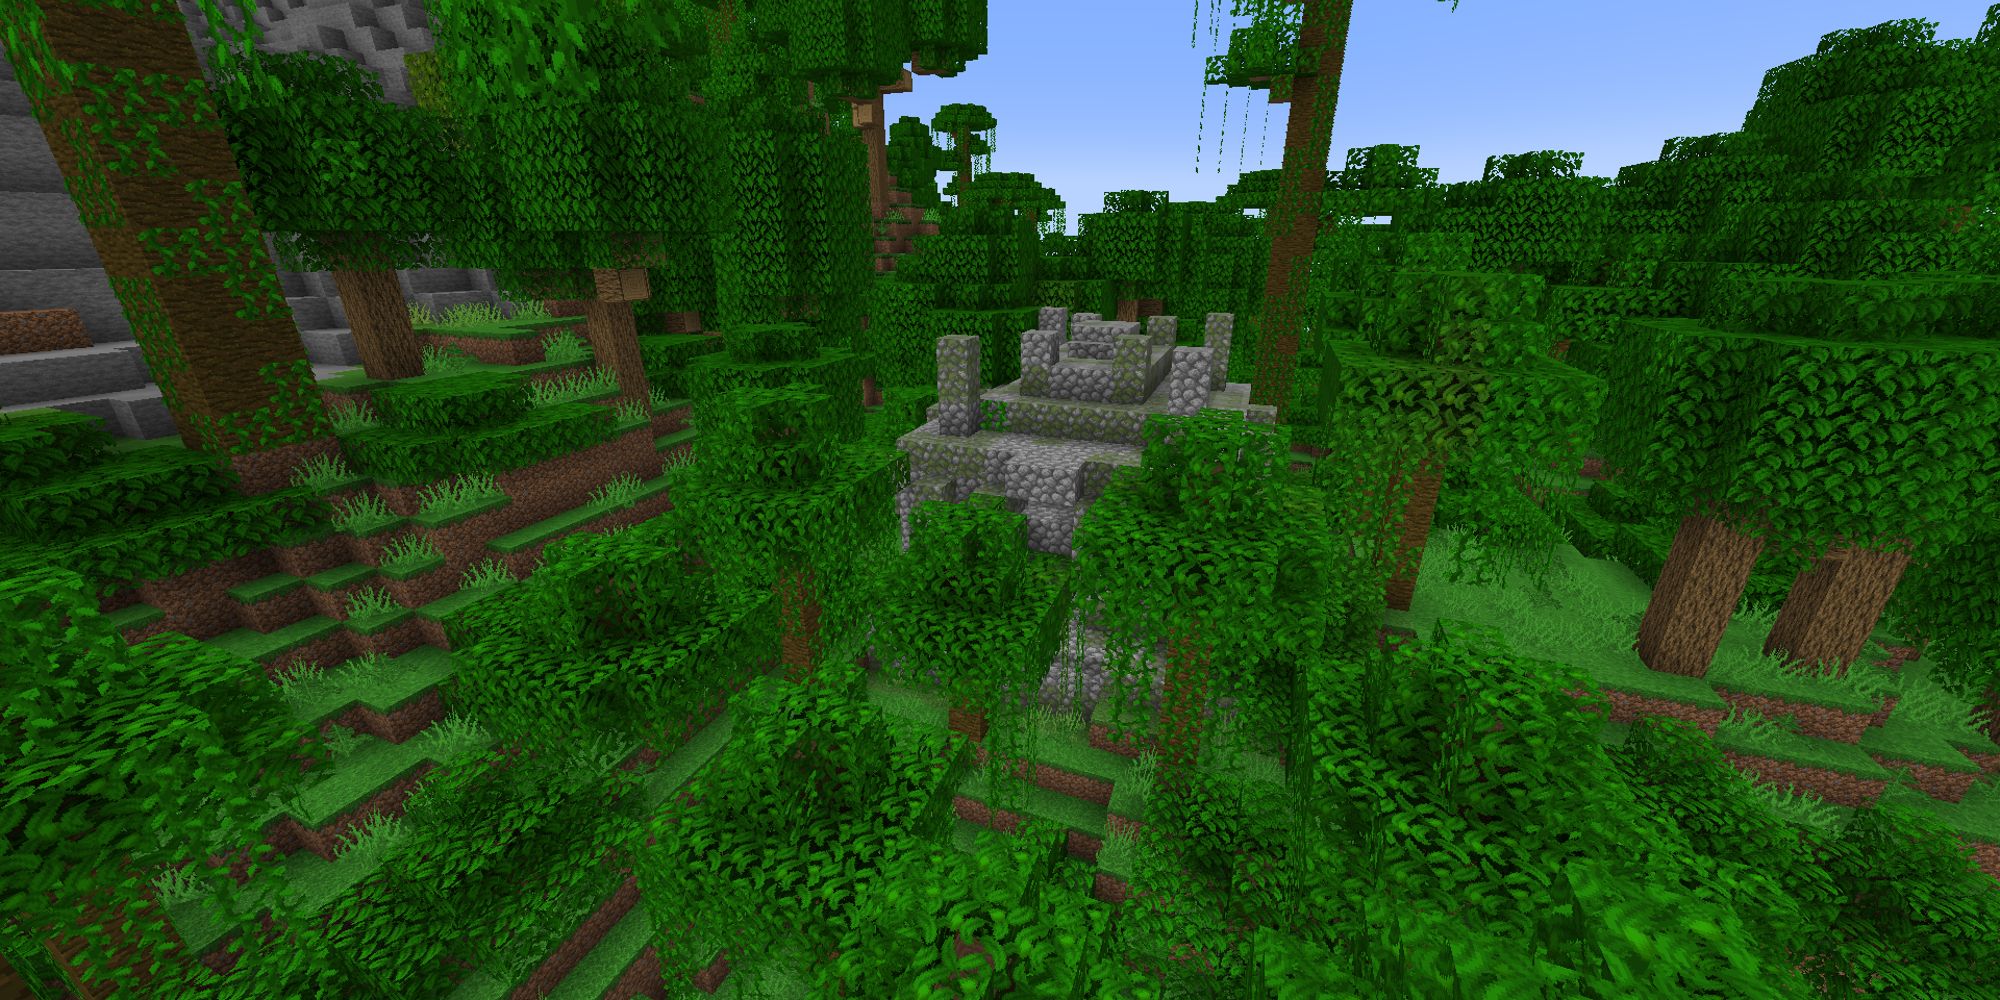 jungle pyramid hidden among trees in jungle biome